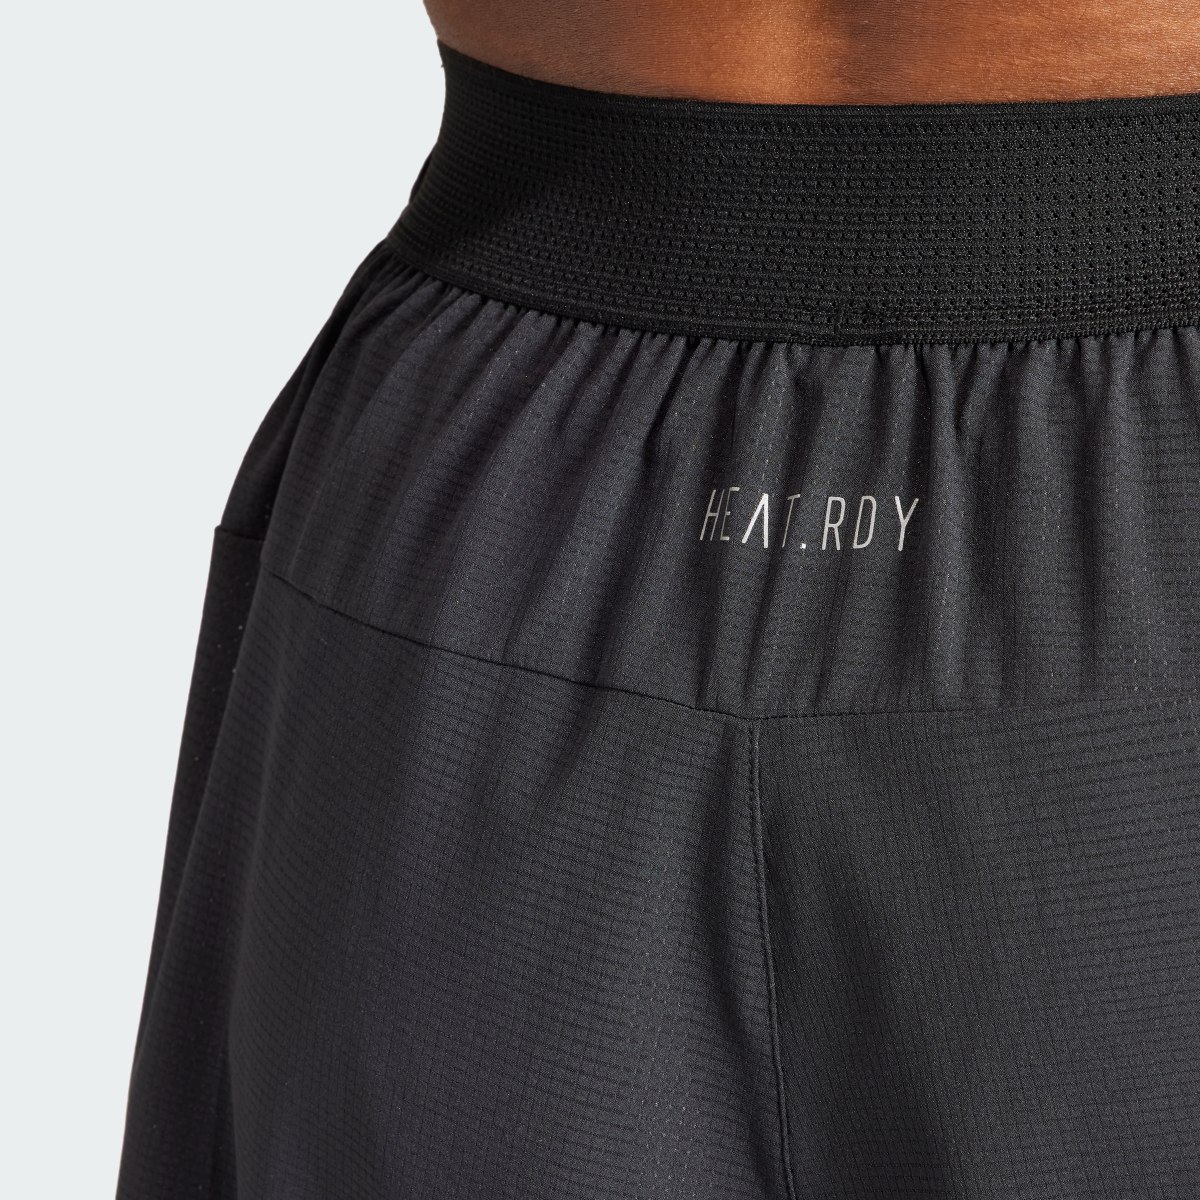 Adidas Designed for Training HIIT Workout HEAT.RDY Shorts. 6